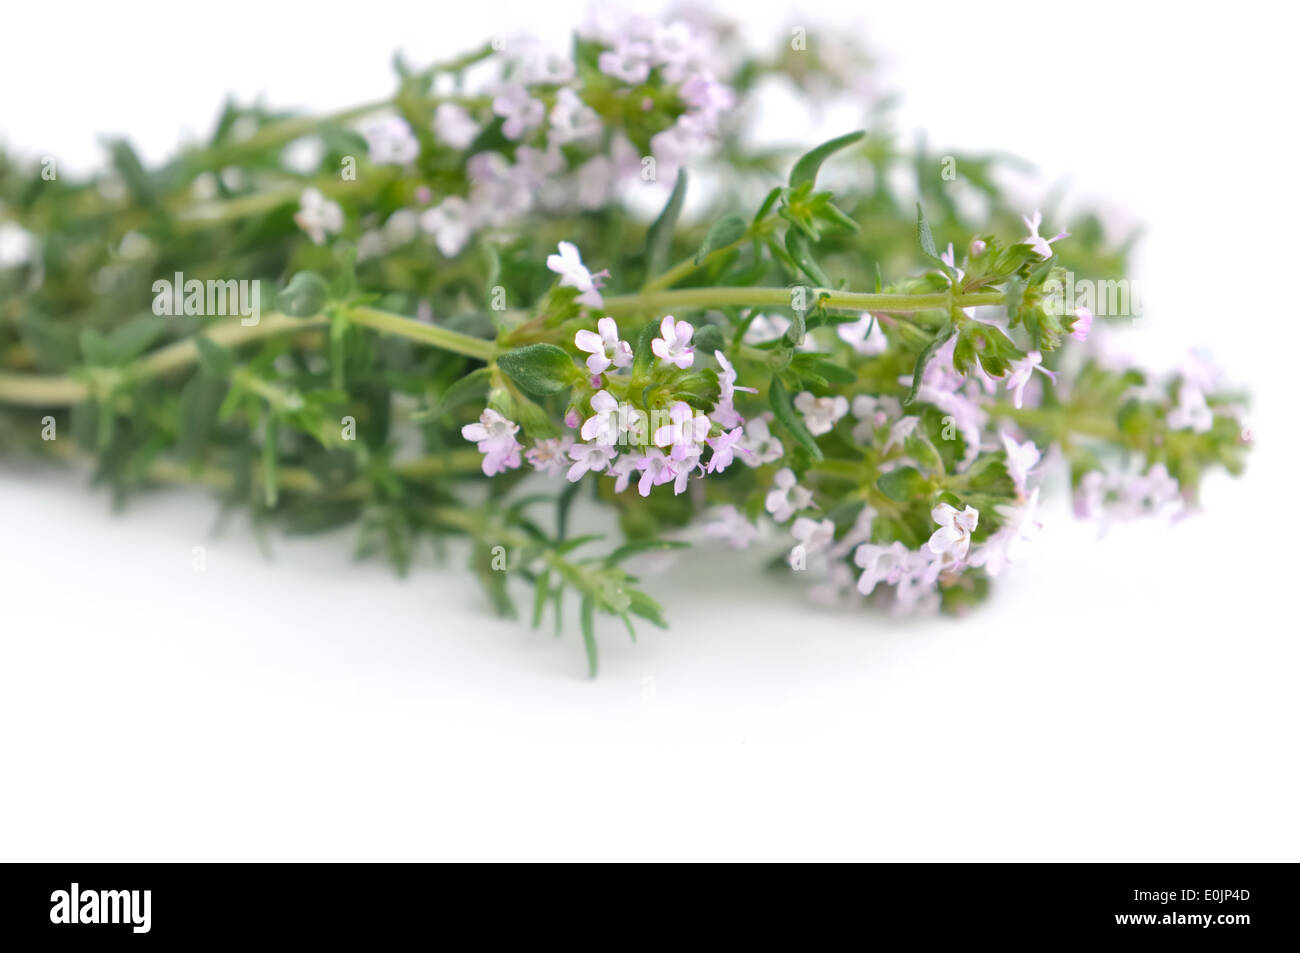 pretty bouquet of thyme flowers on white background Stock Photo